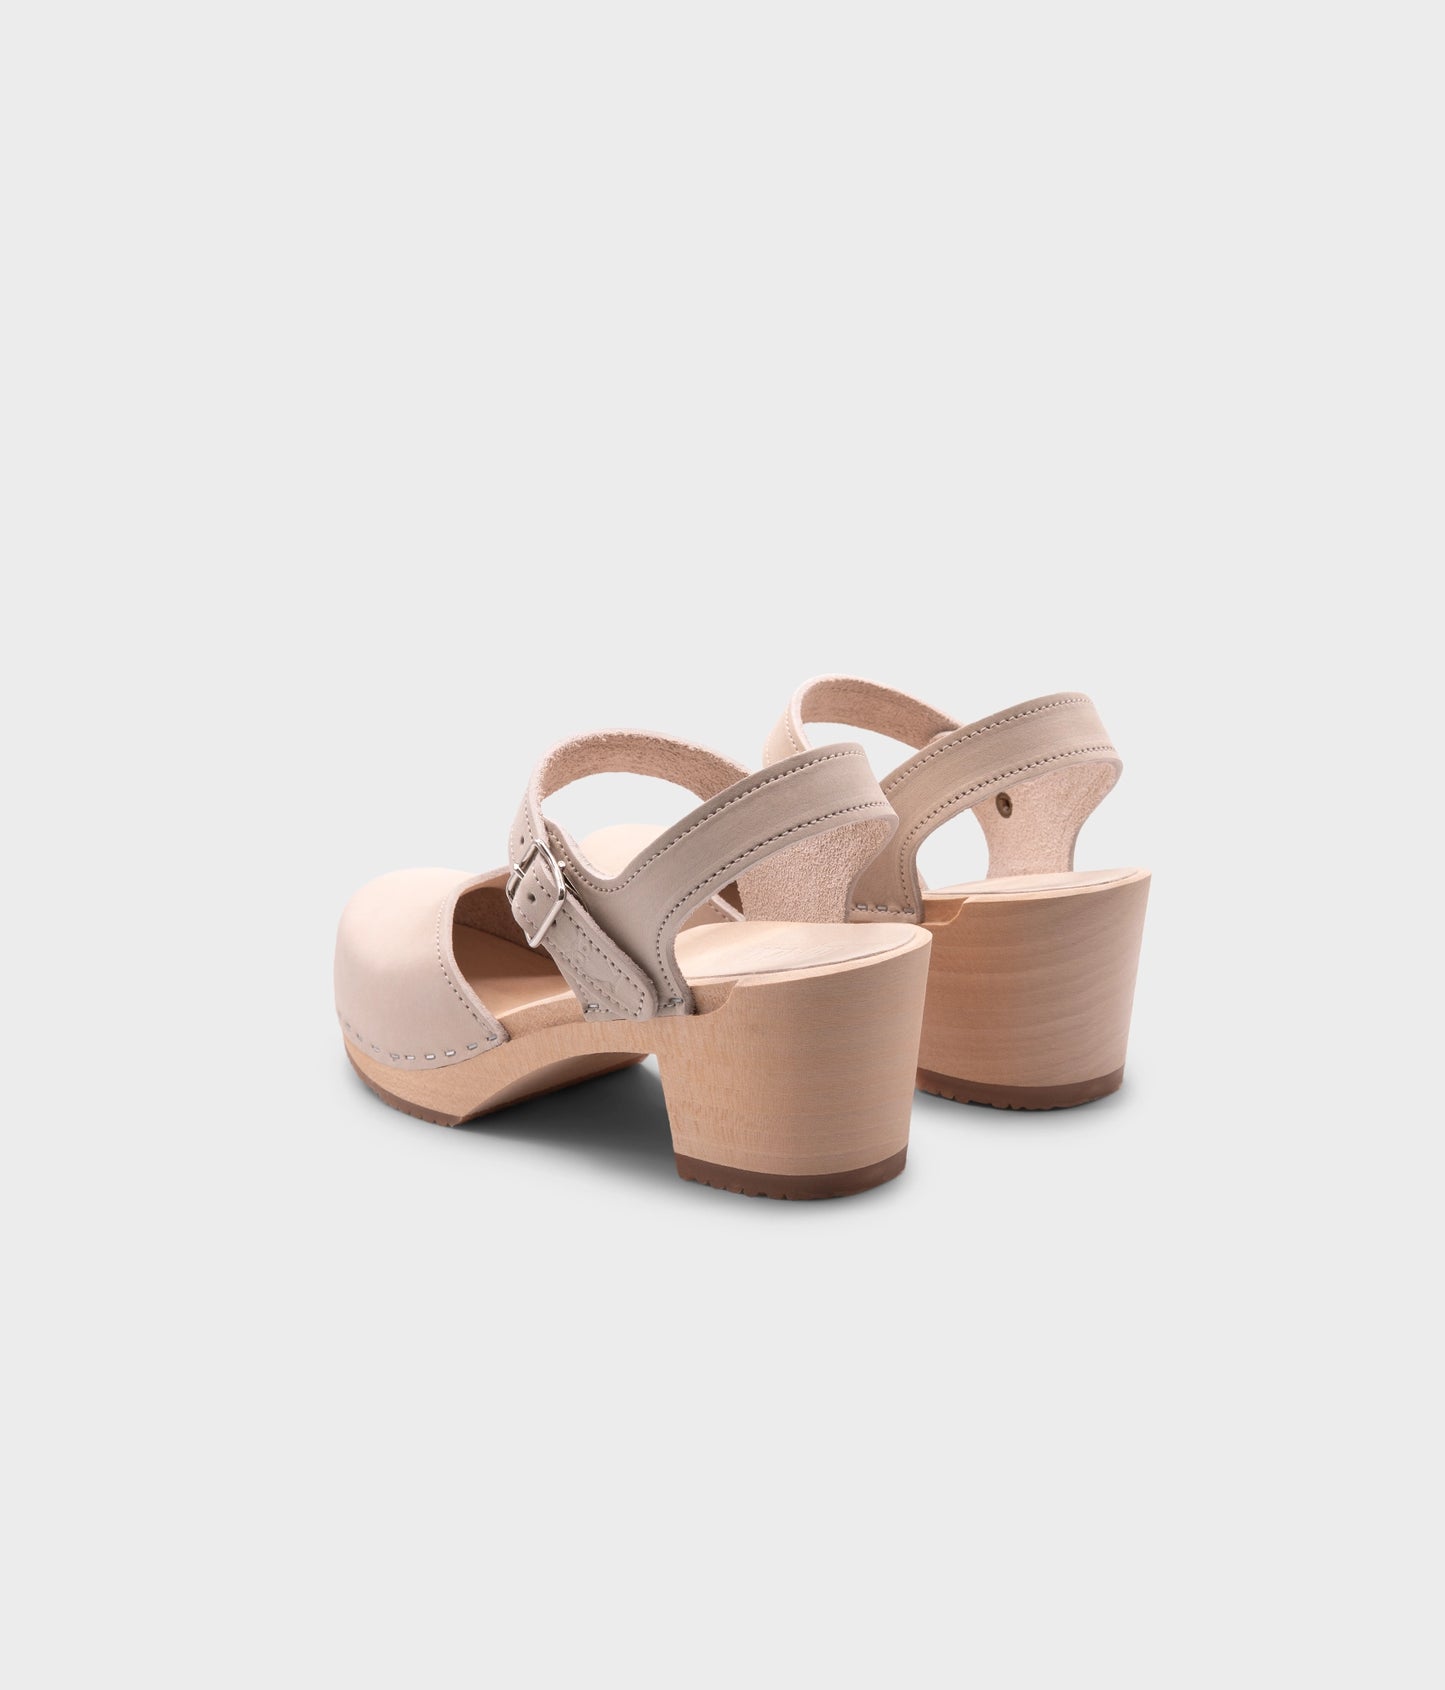 high heeled closed-toe clog sandal in sand white nubuck leather stapled on a light wooden base